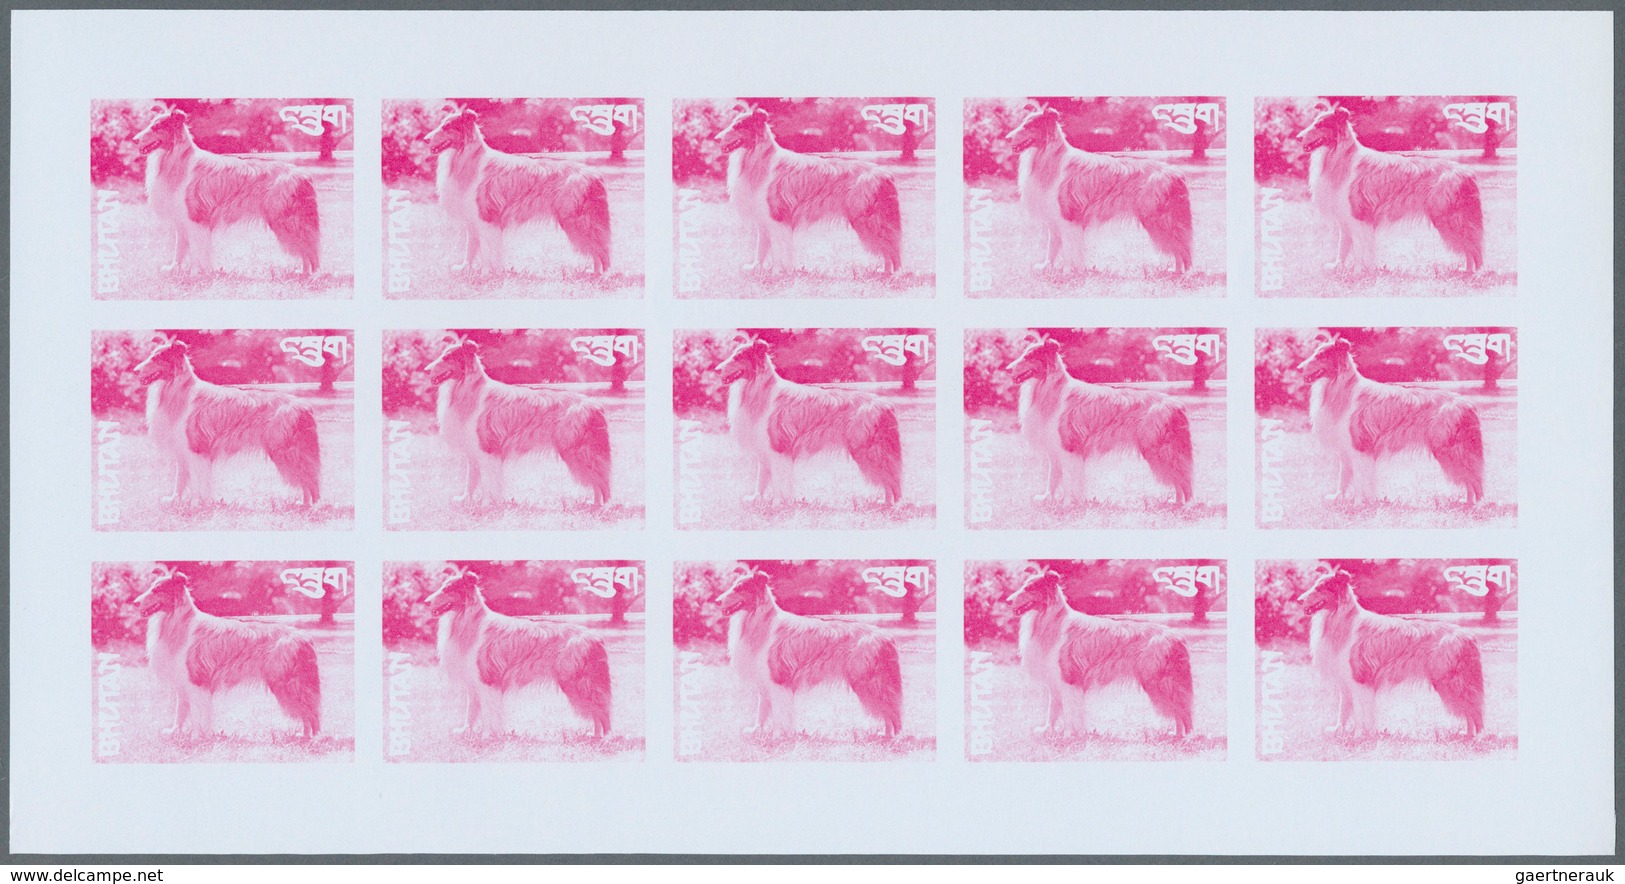 Thematik: Tiere-Hunde / animals-dogs: 1973, Bhutan. Progressive proofs set of sheets for the complet